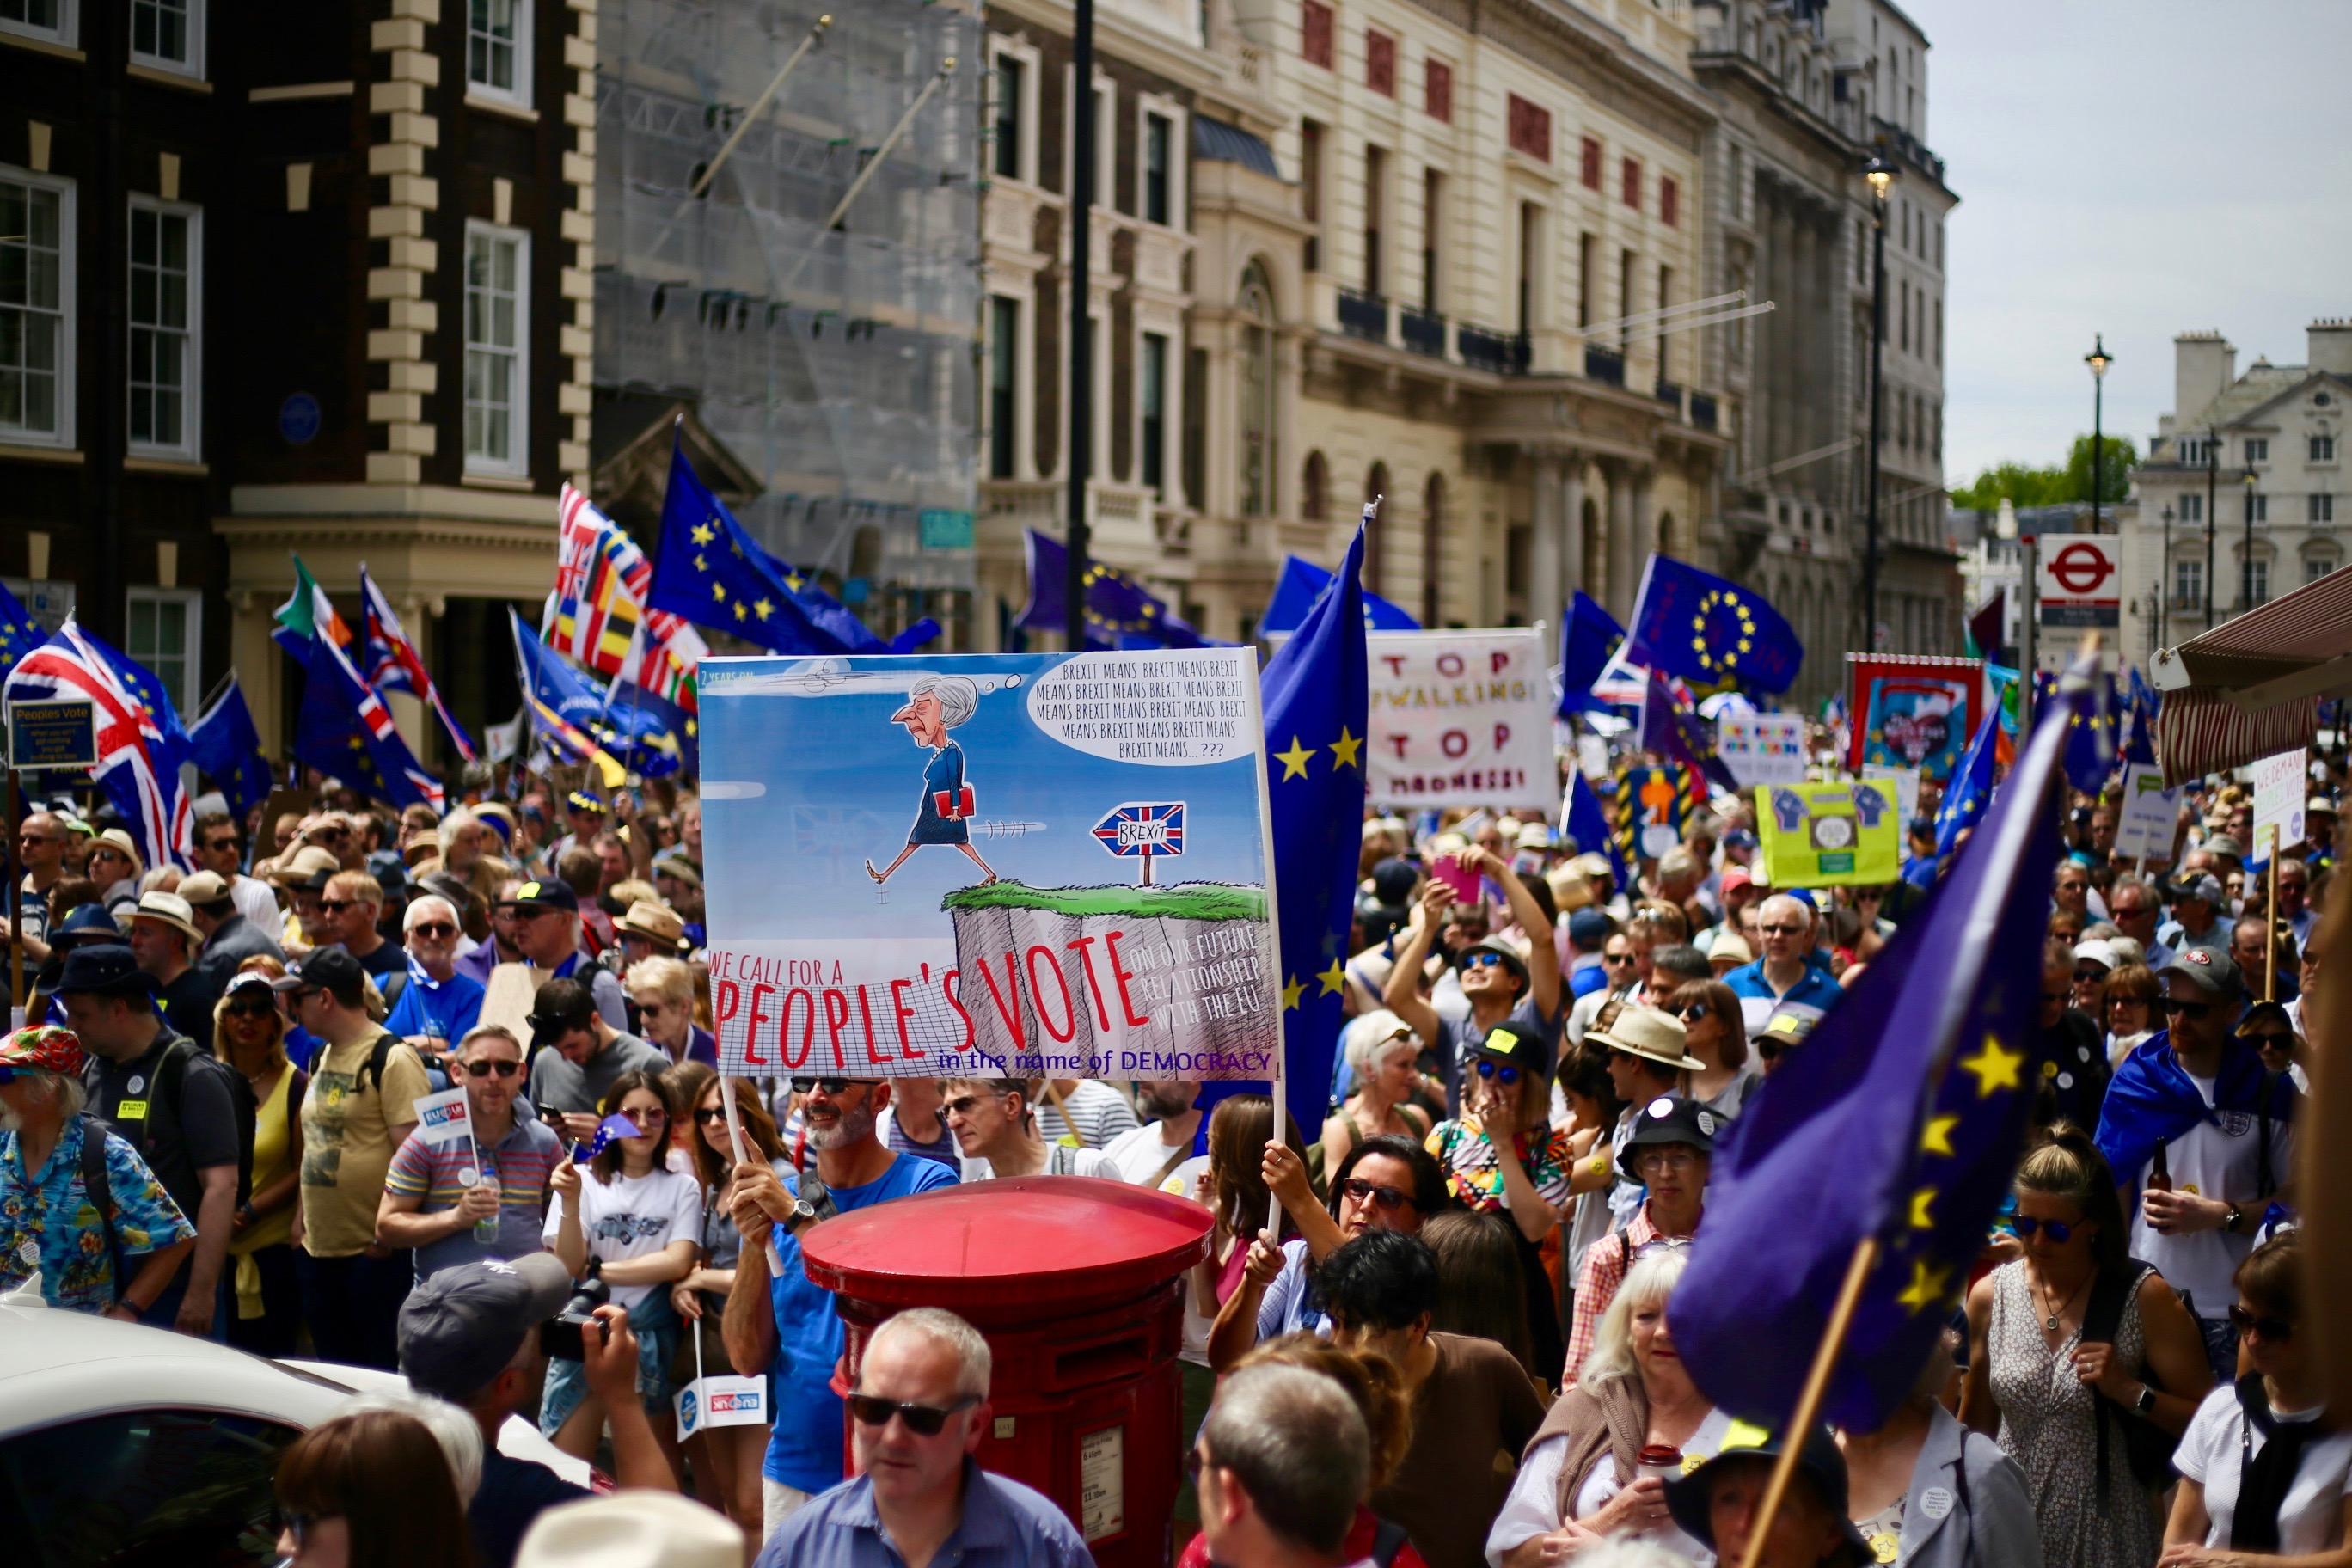 People's_vote_on_Brexit_march,_London,_June_23,_2018_23